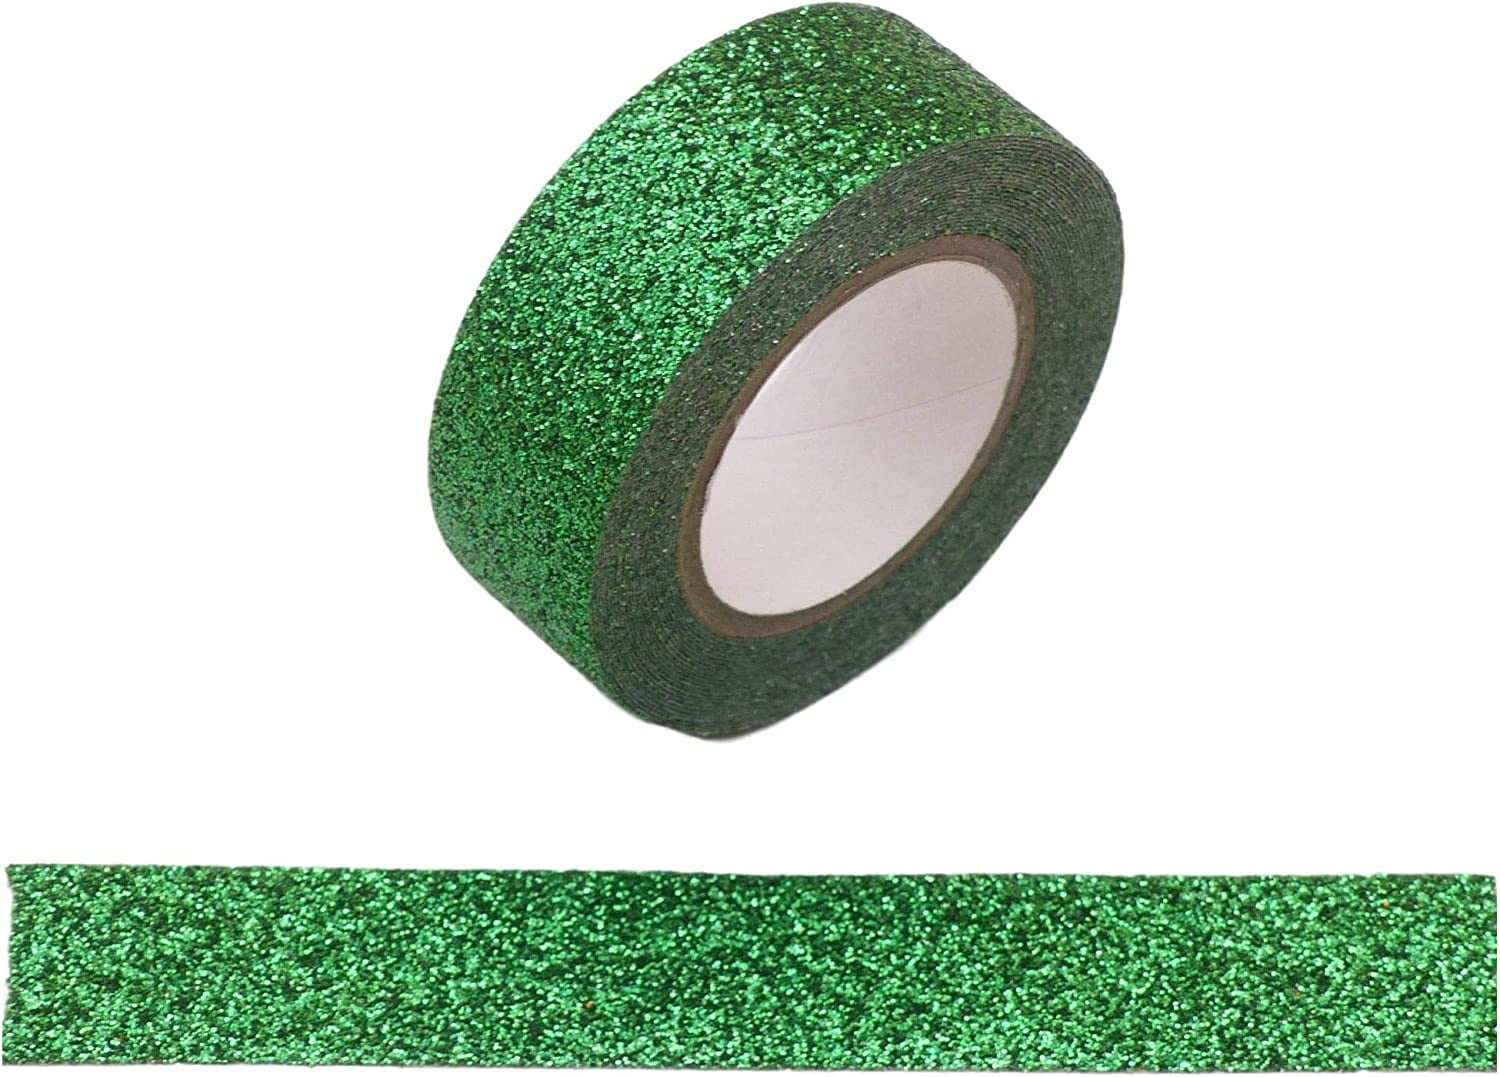 Syntego Solid Foil Washi Tape Decorative Self Adhesive Masking Tape 15mm x  10 Meters (Green)